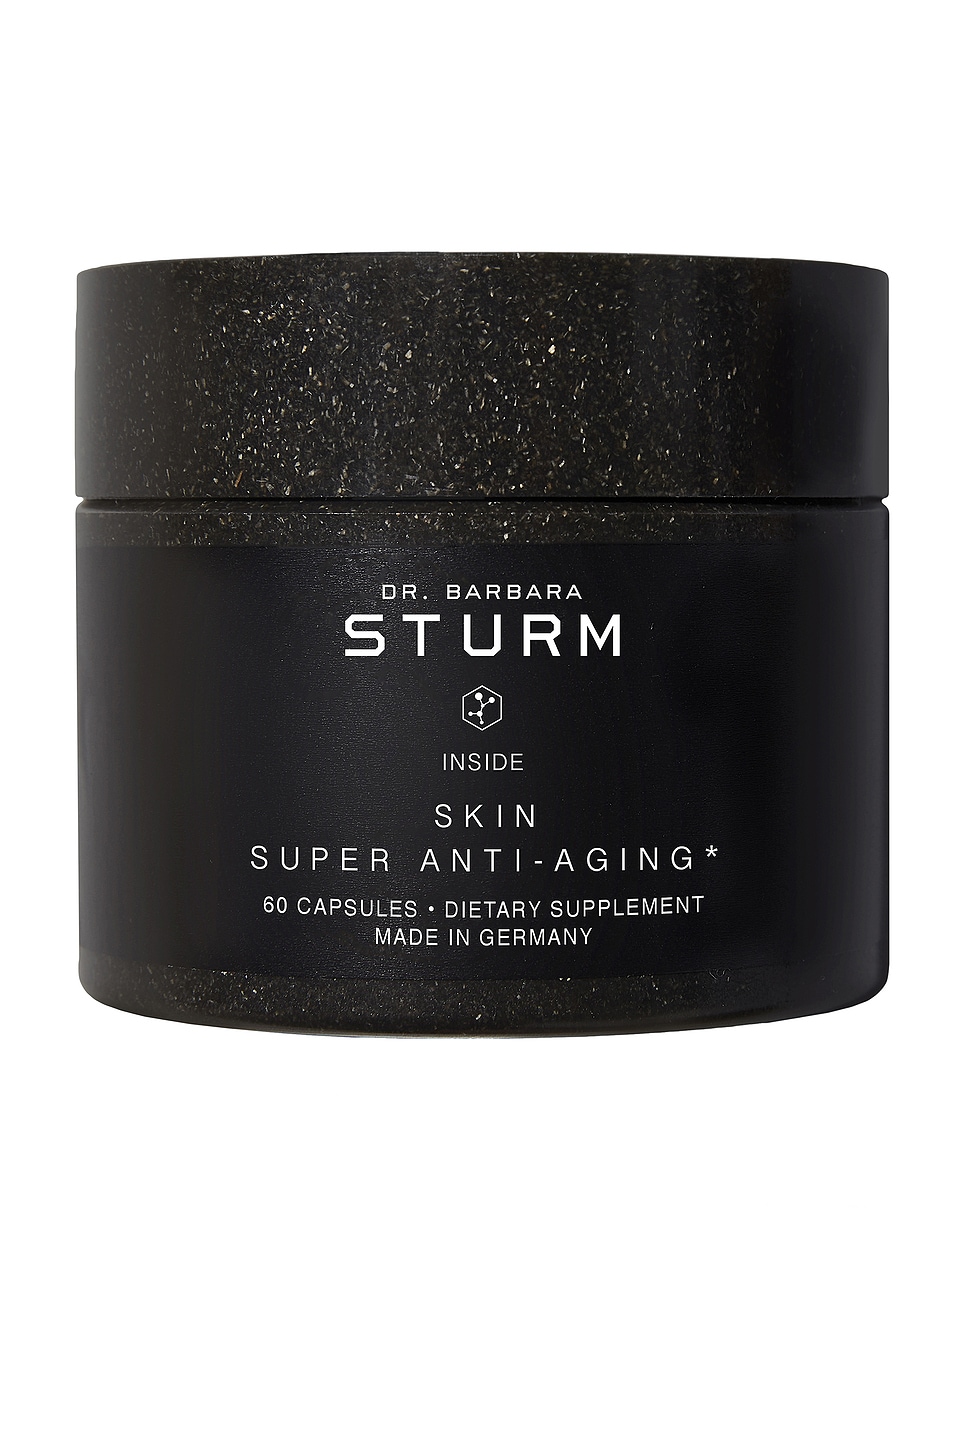 Skin Super Anti-Aging Supplements in Beauty: NA